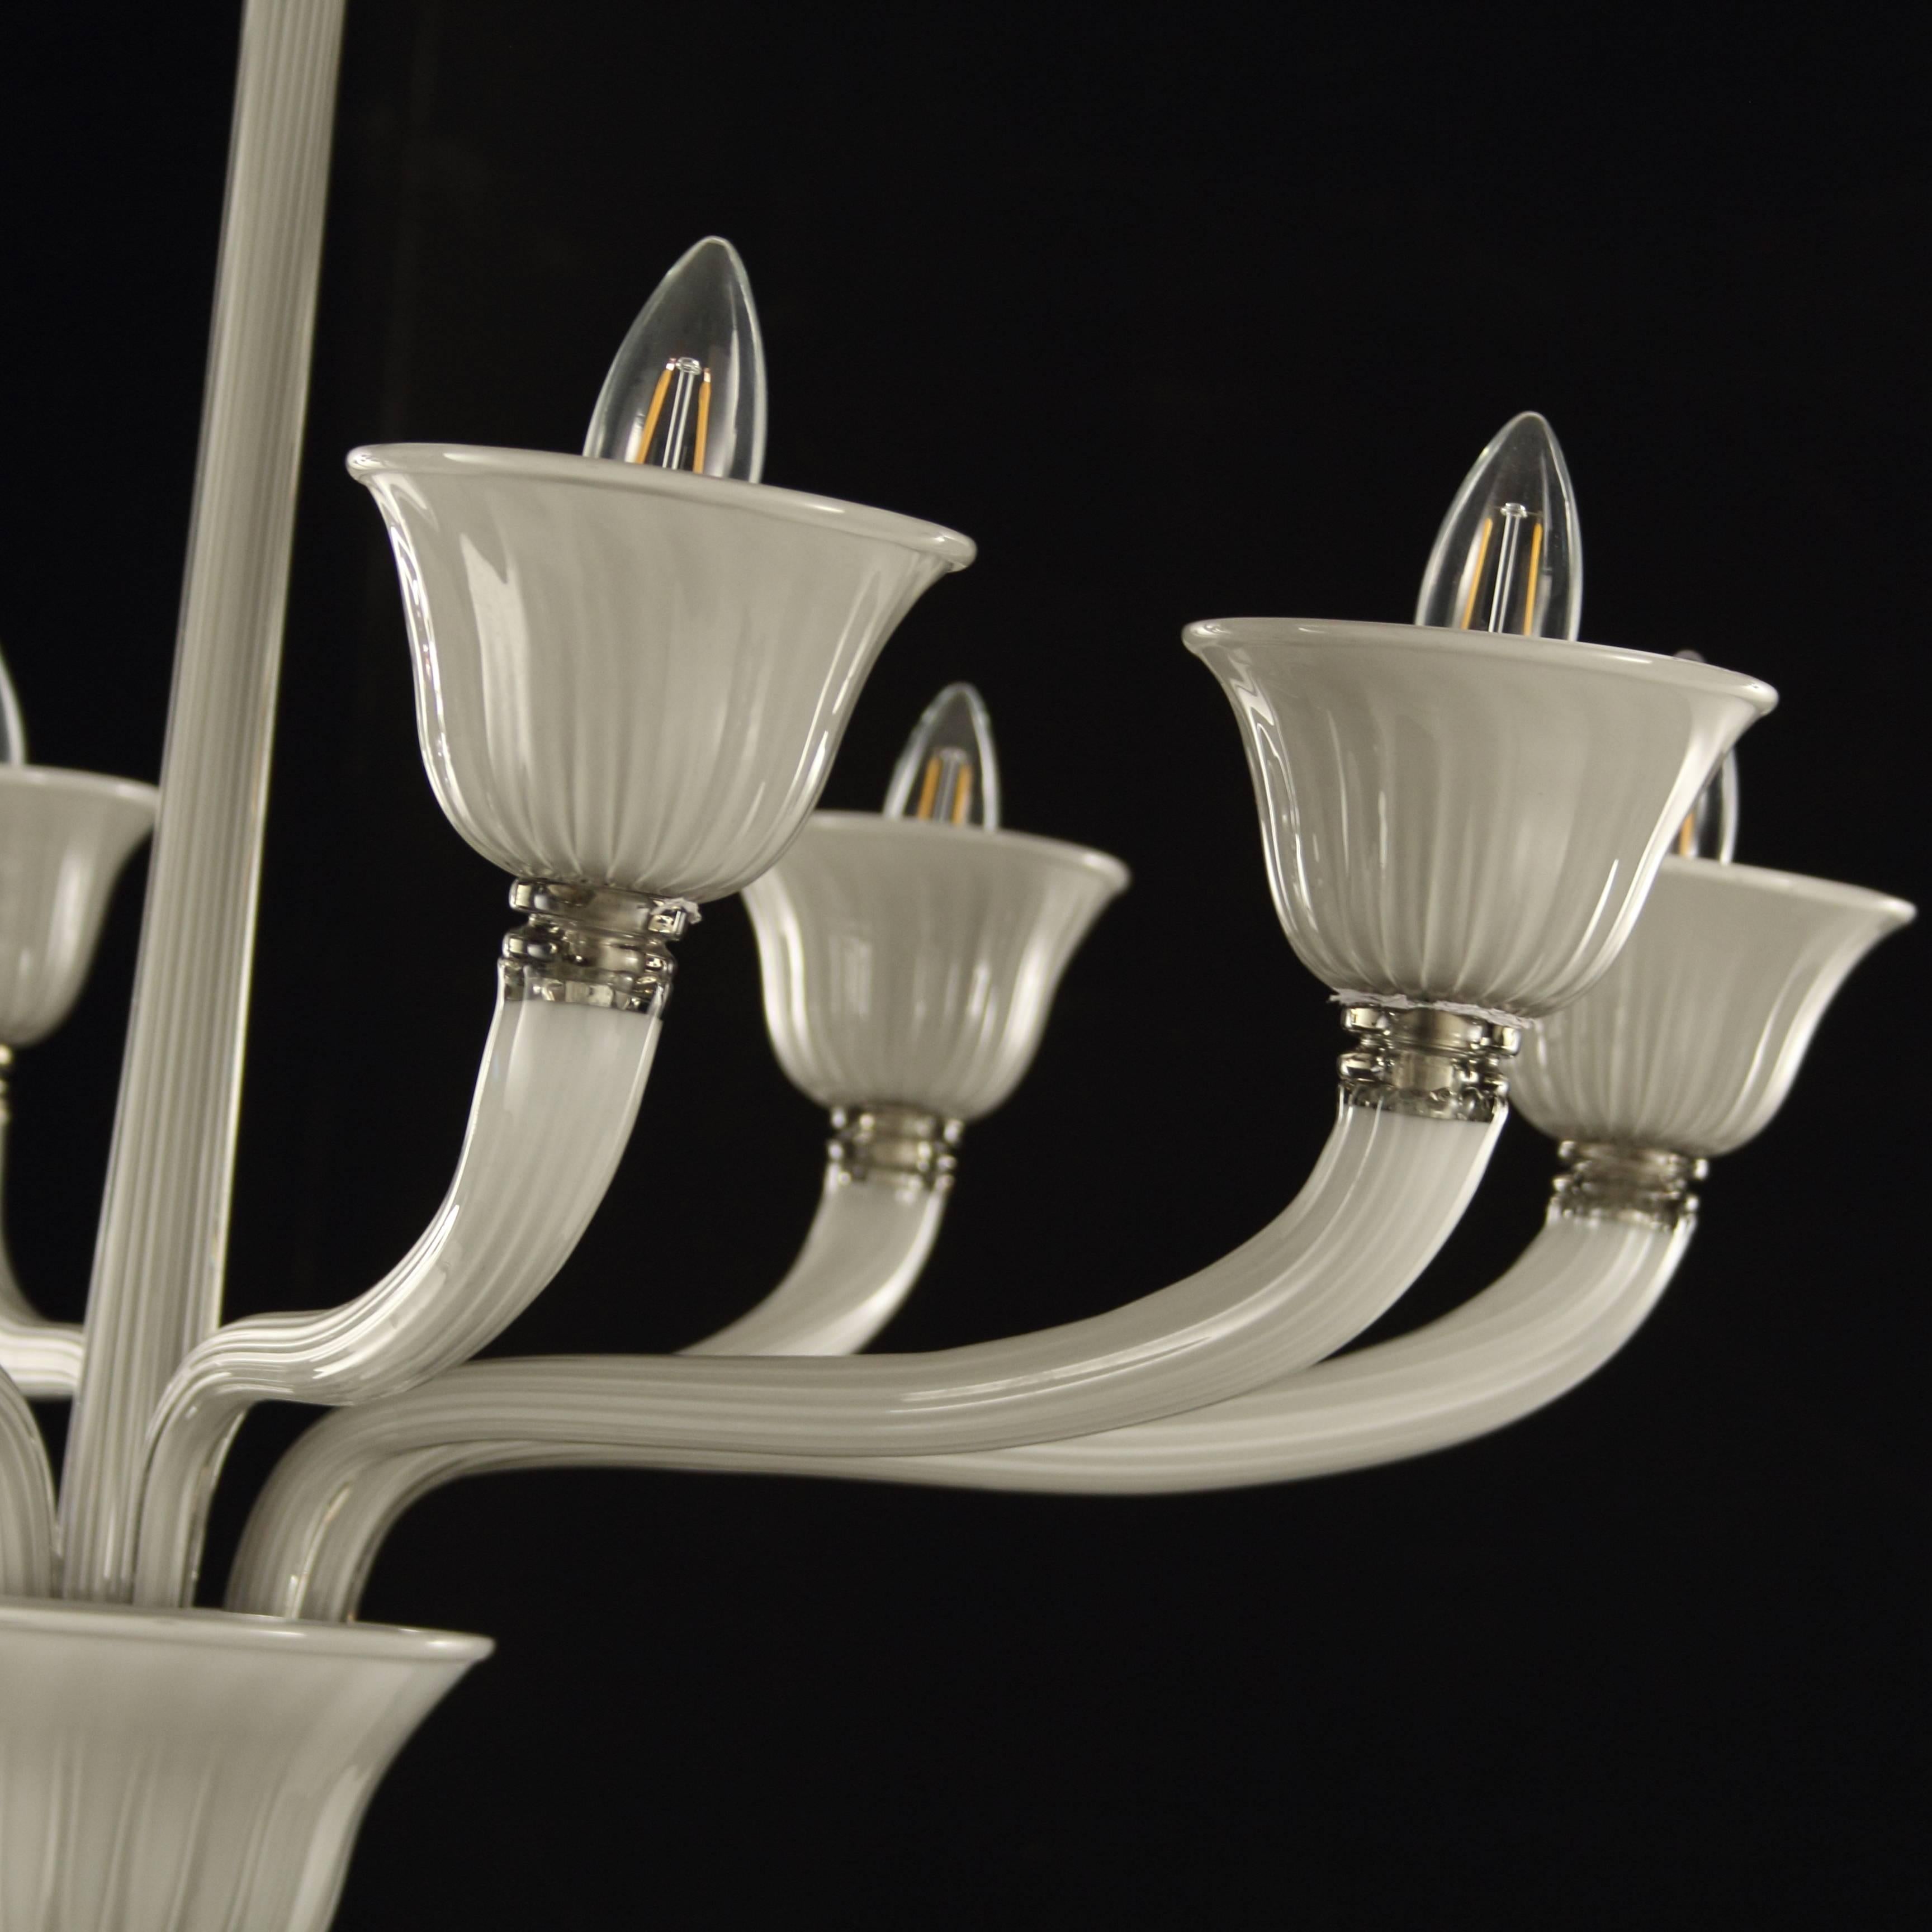 Deco style eight-arms Venetian chandelier, handmade with Murano blown glass opaque grey color. 
Silver frame finish.
Matching wall lights available.

We can wire it for the U.S. (E26) or E.U. (E27) or other international standards on request.